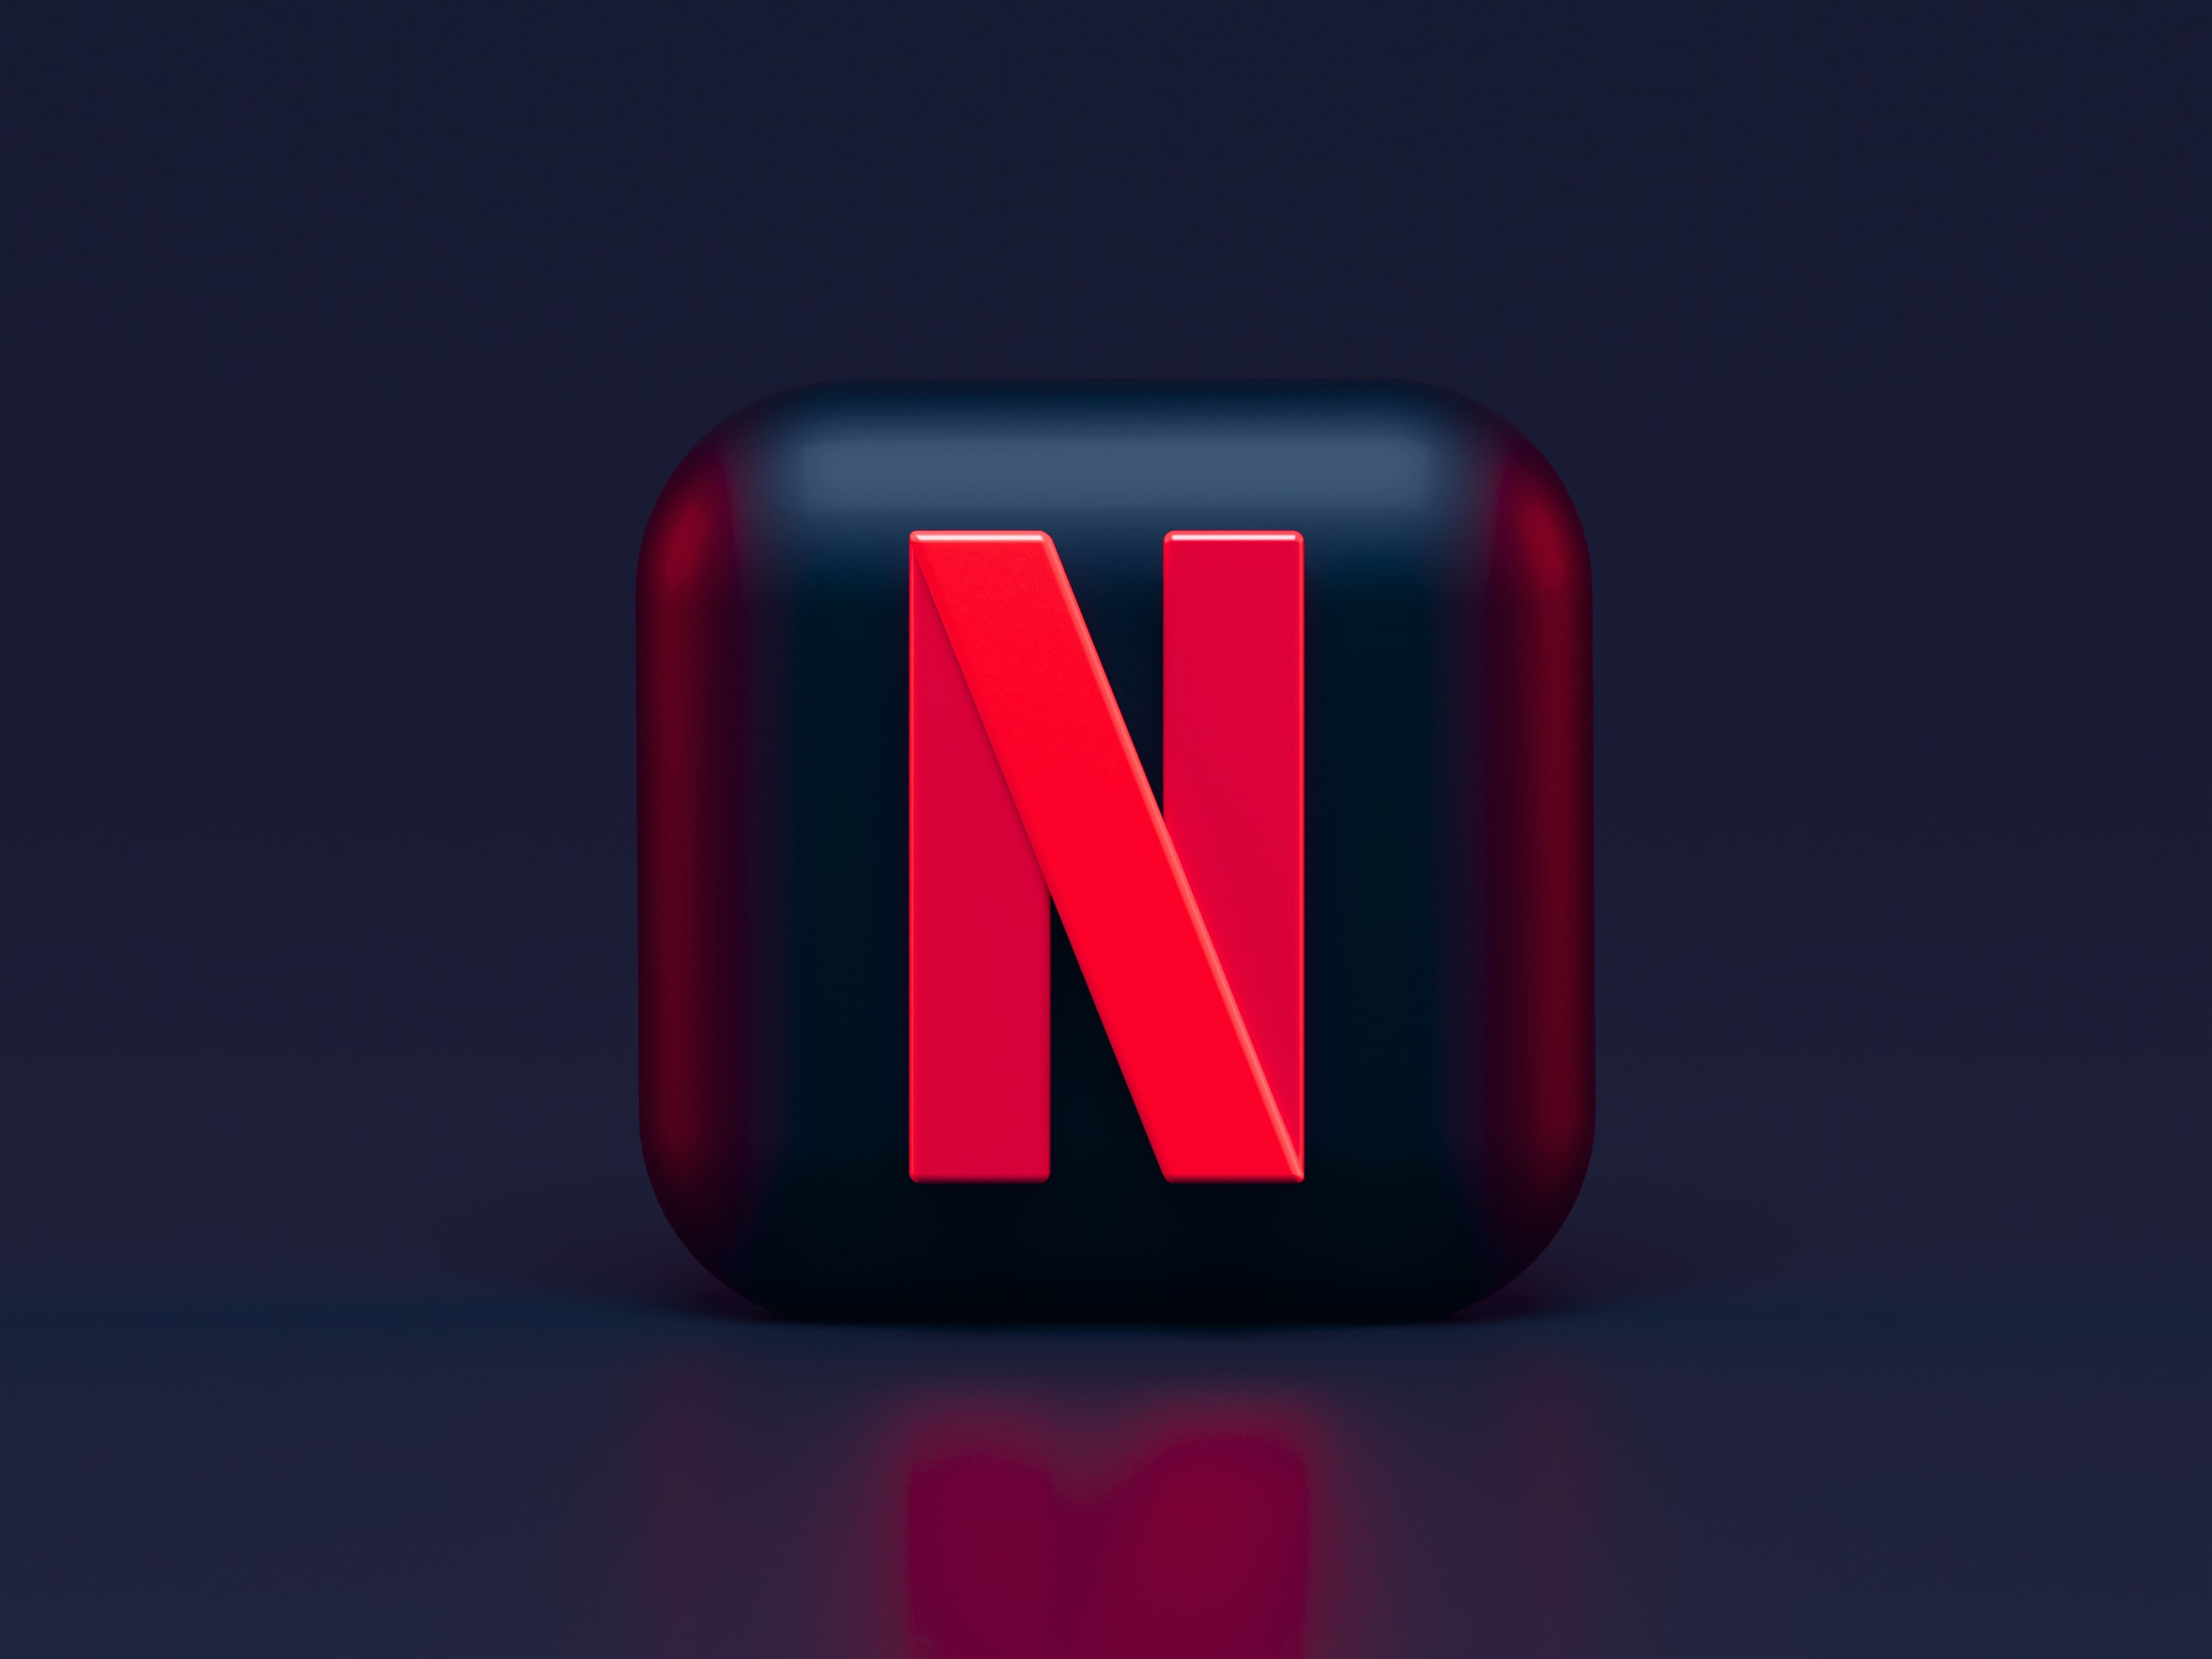 Wedbush Upgrades Netflix As &#39;Immensely Profitable, Slow-Growth Company&#39;: What Else Interests The Analyst?